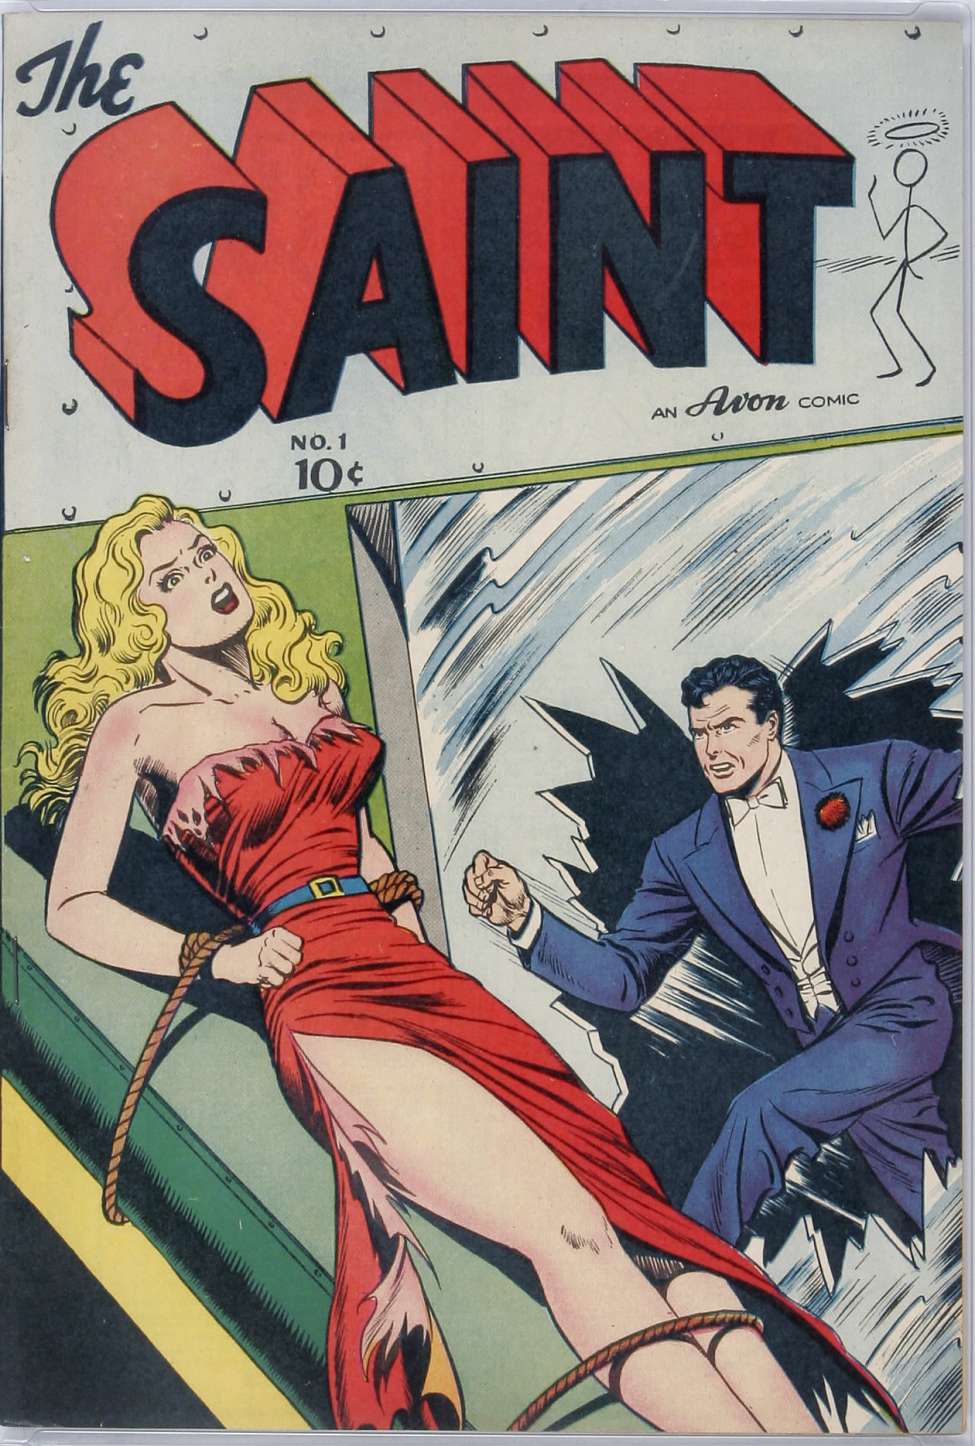 Book Cover For The Saint 1 - Version 1